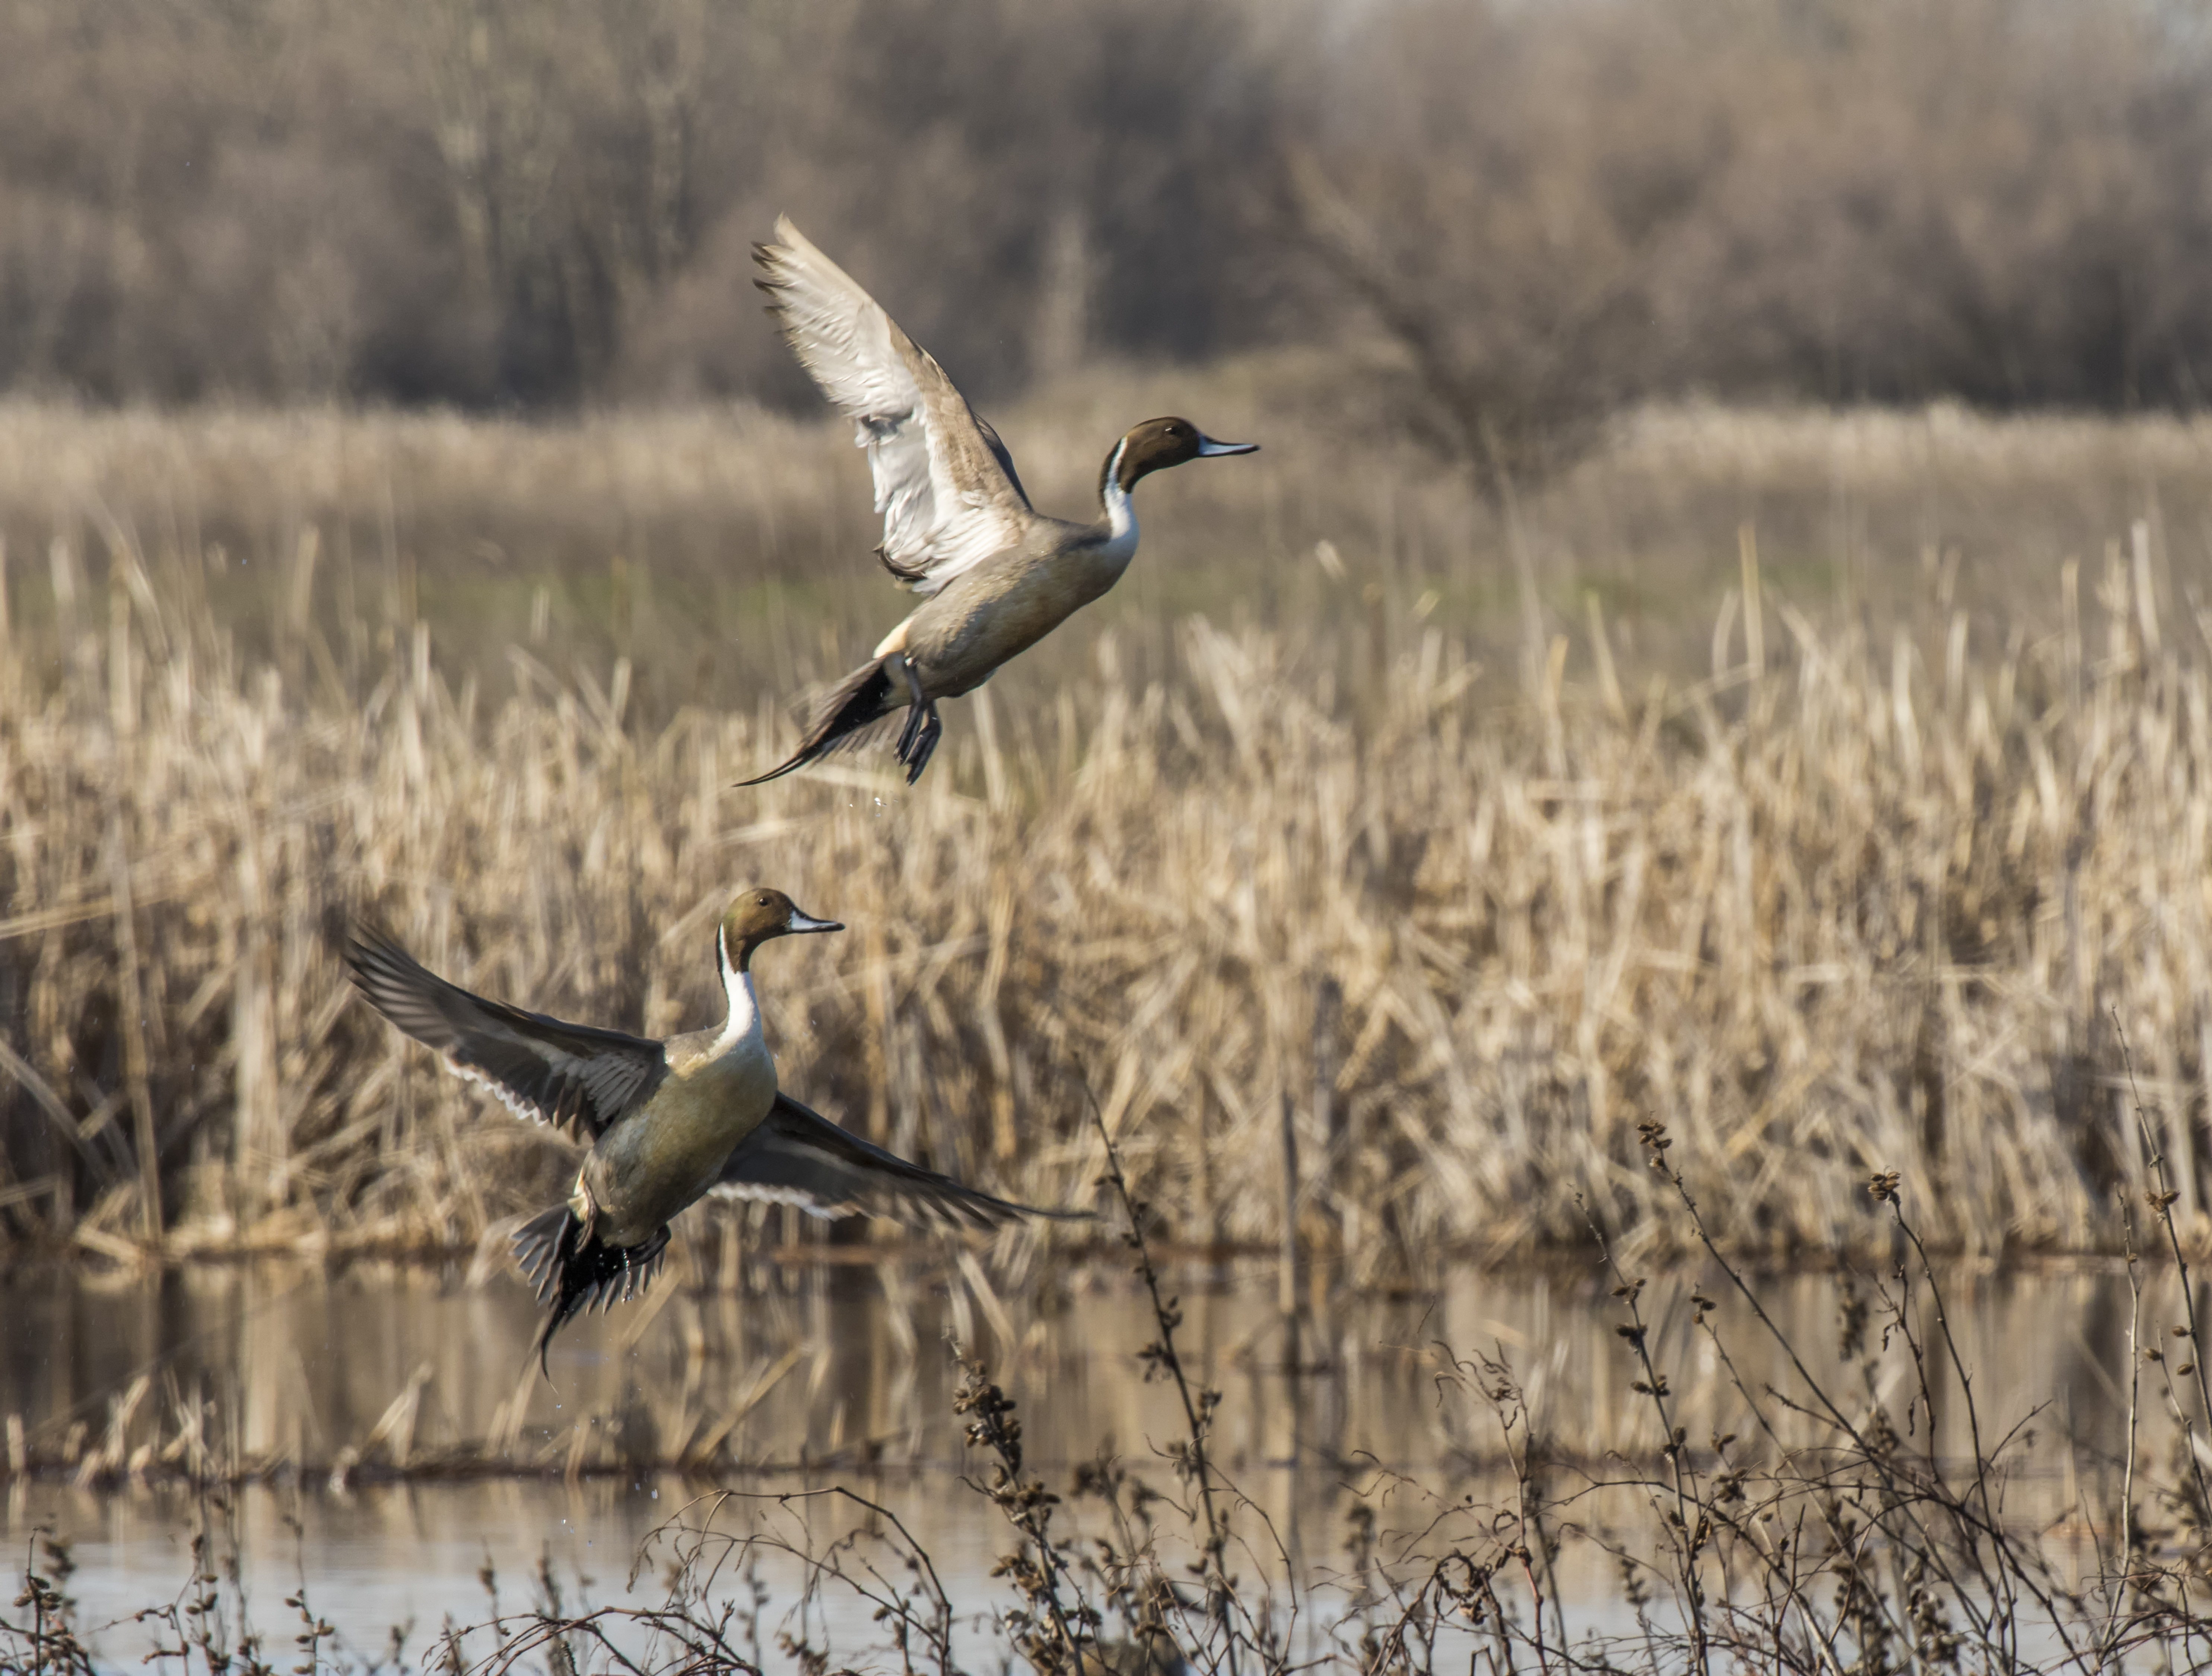 Two northern pintail ducks flushing from the wetland.